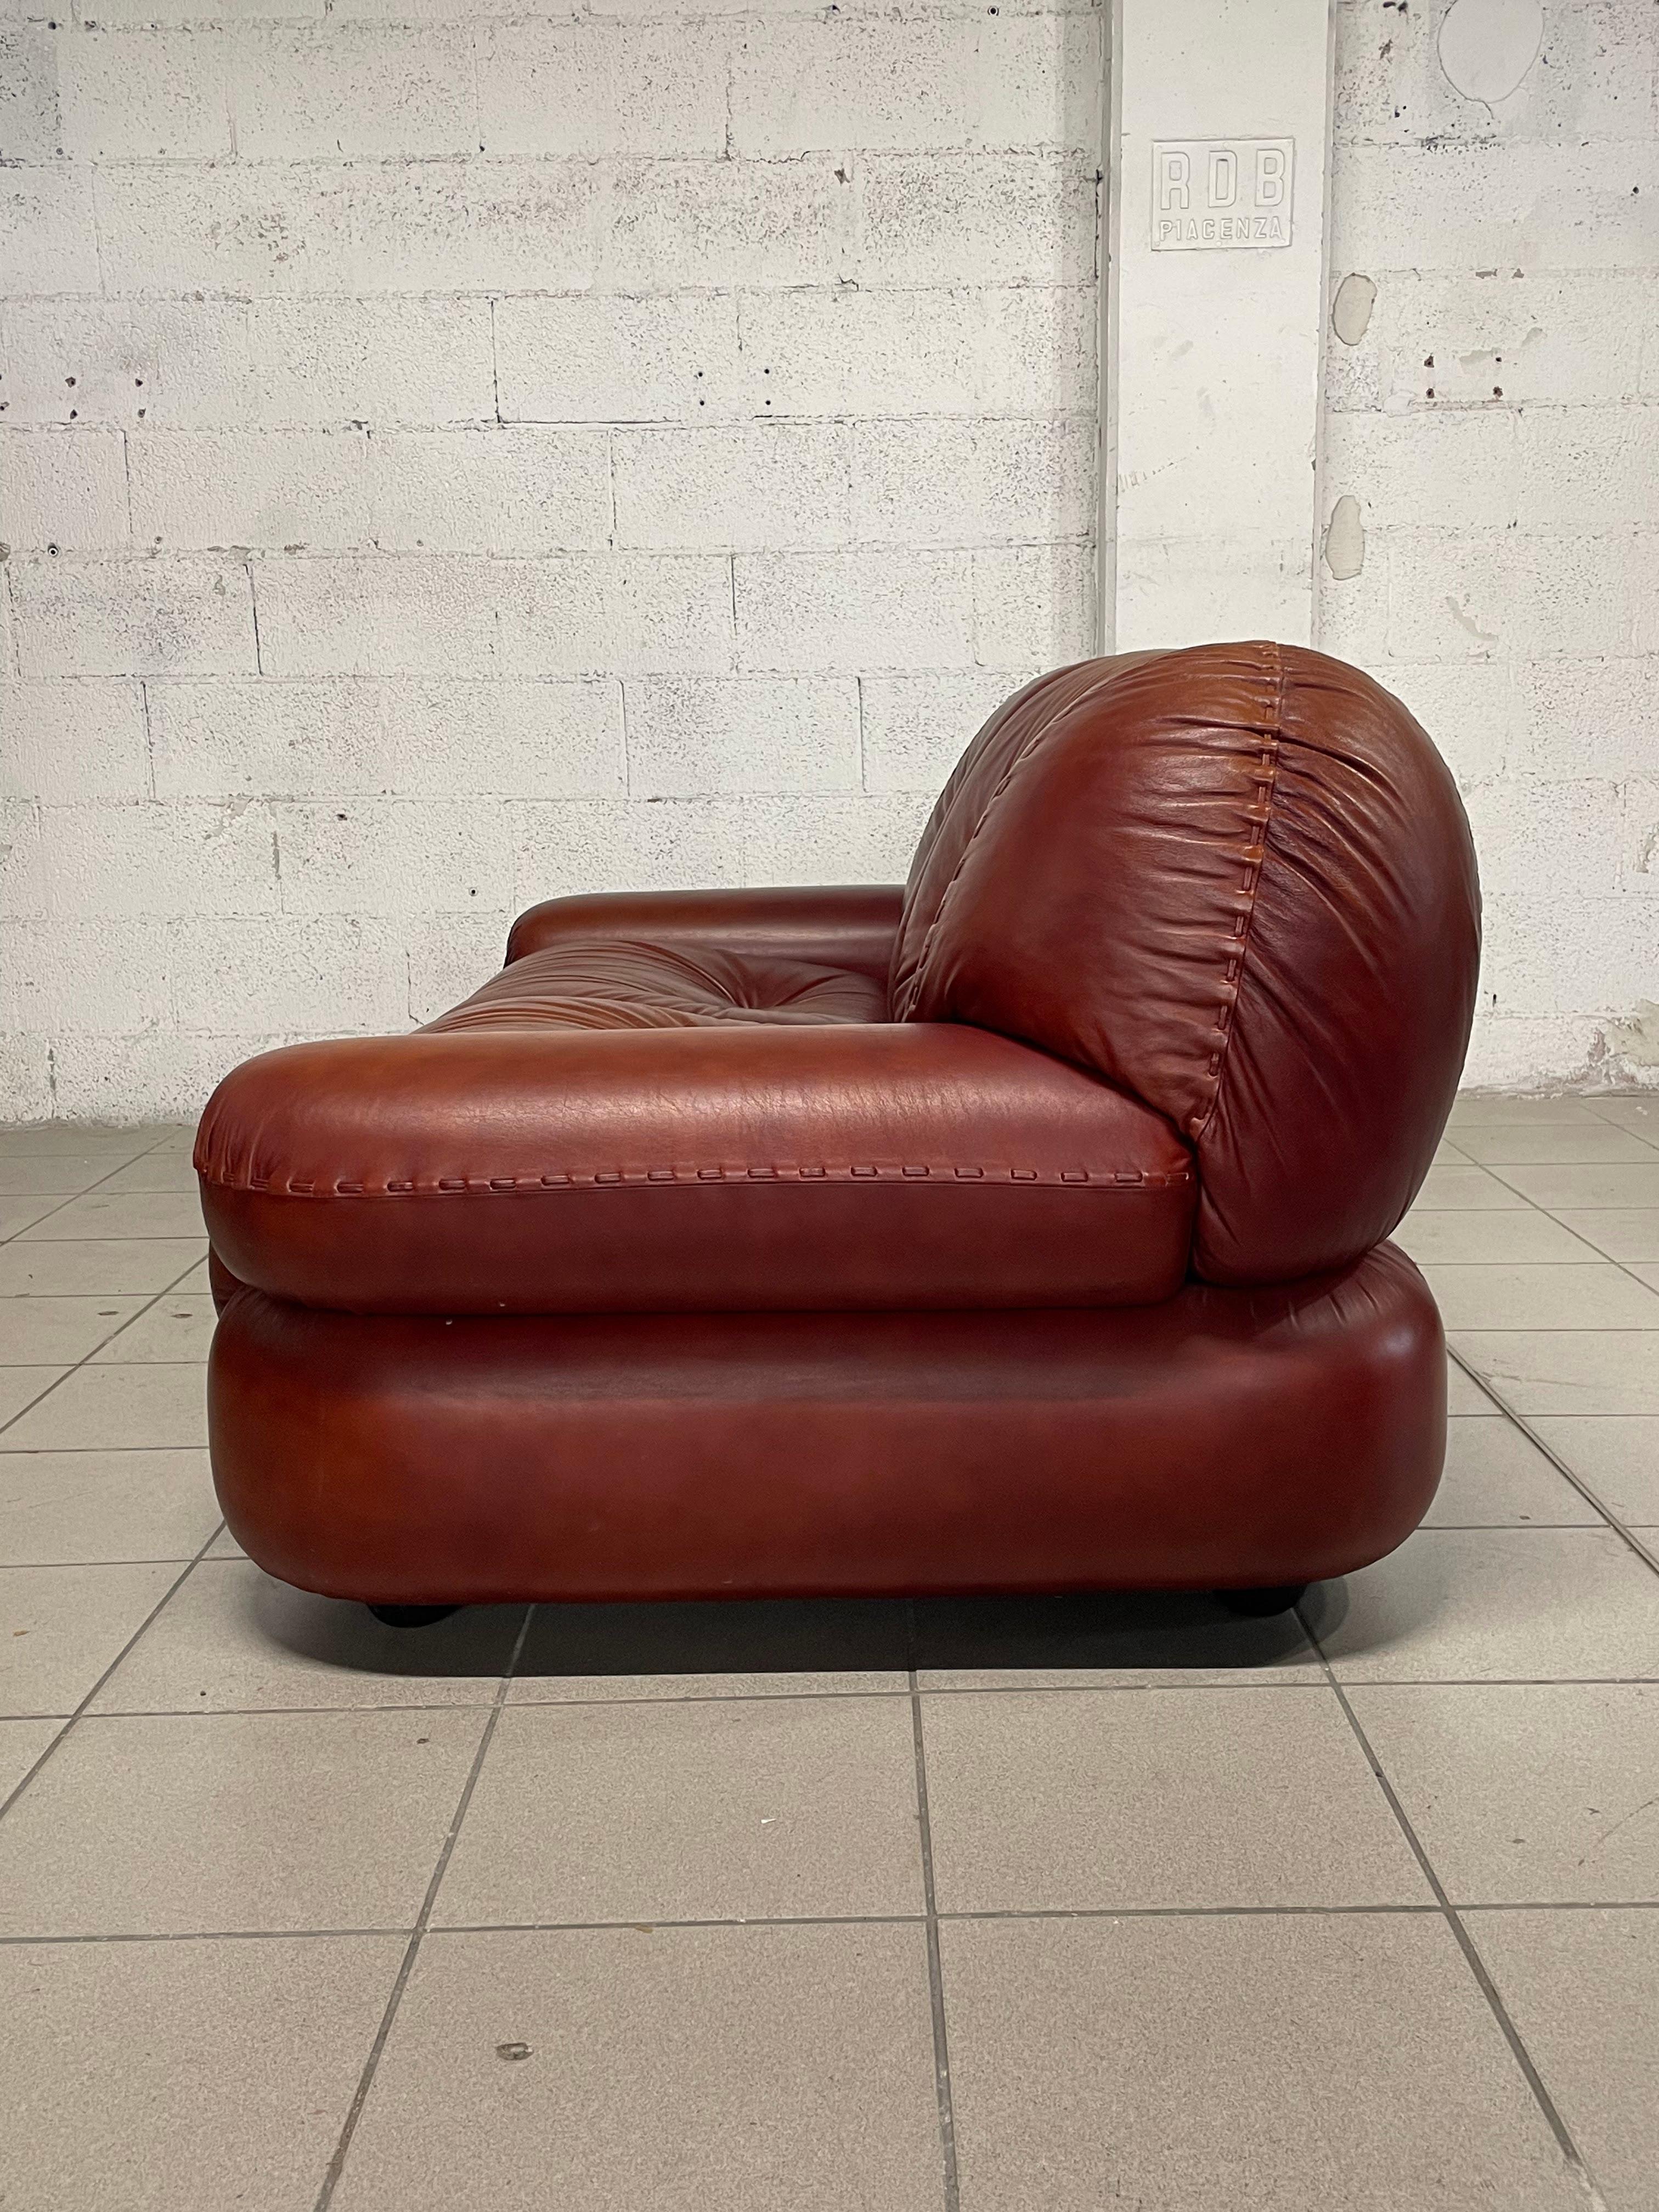 2-seater leather sofa mod. Sapporo by Mobil Girgi Italia, 1970s For Sale 1